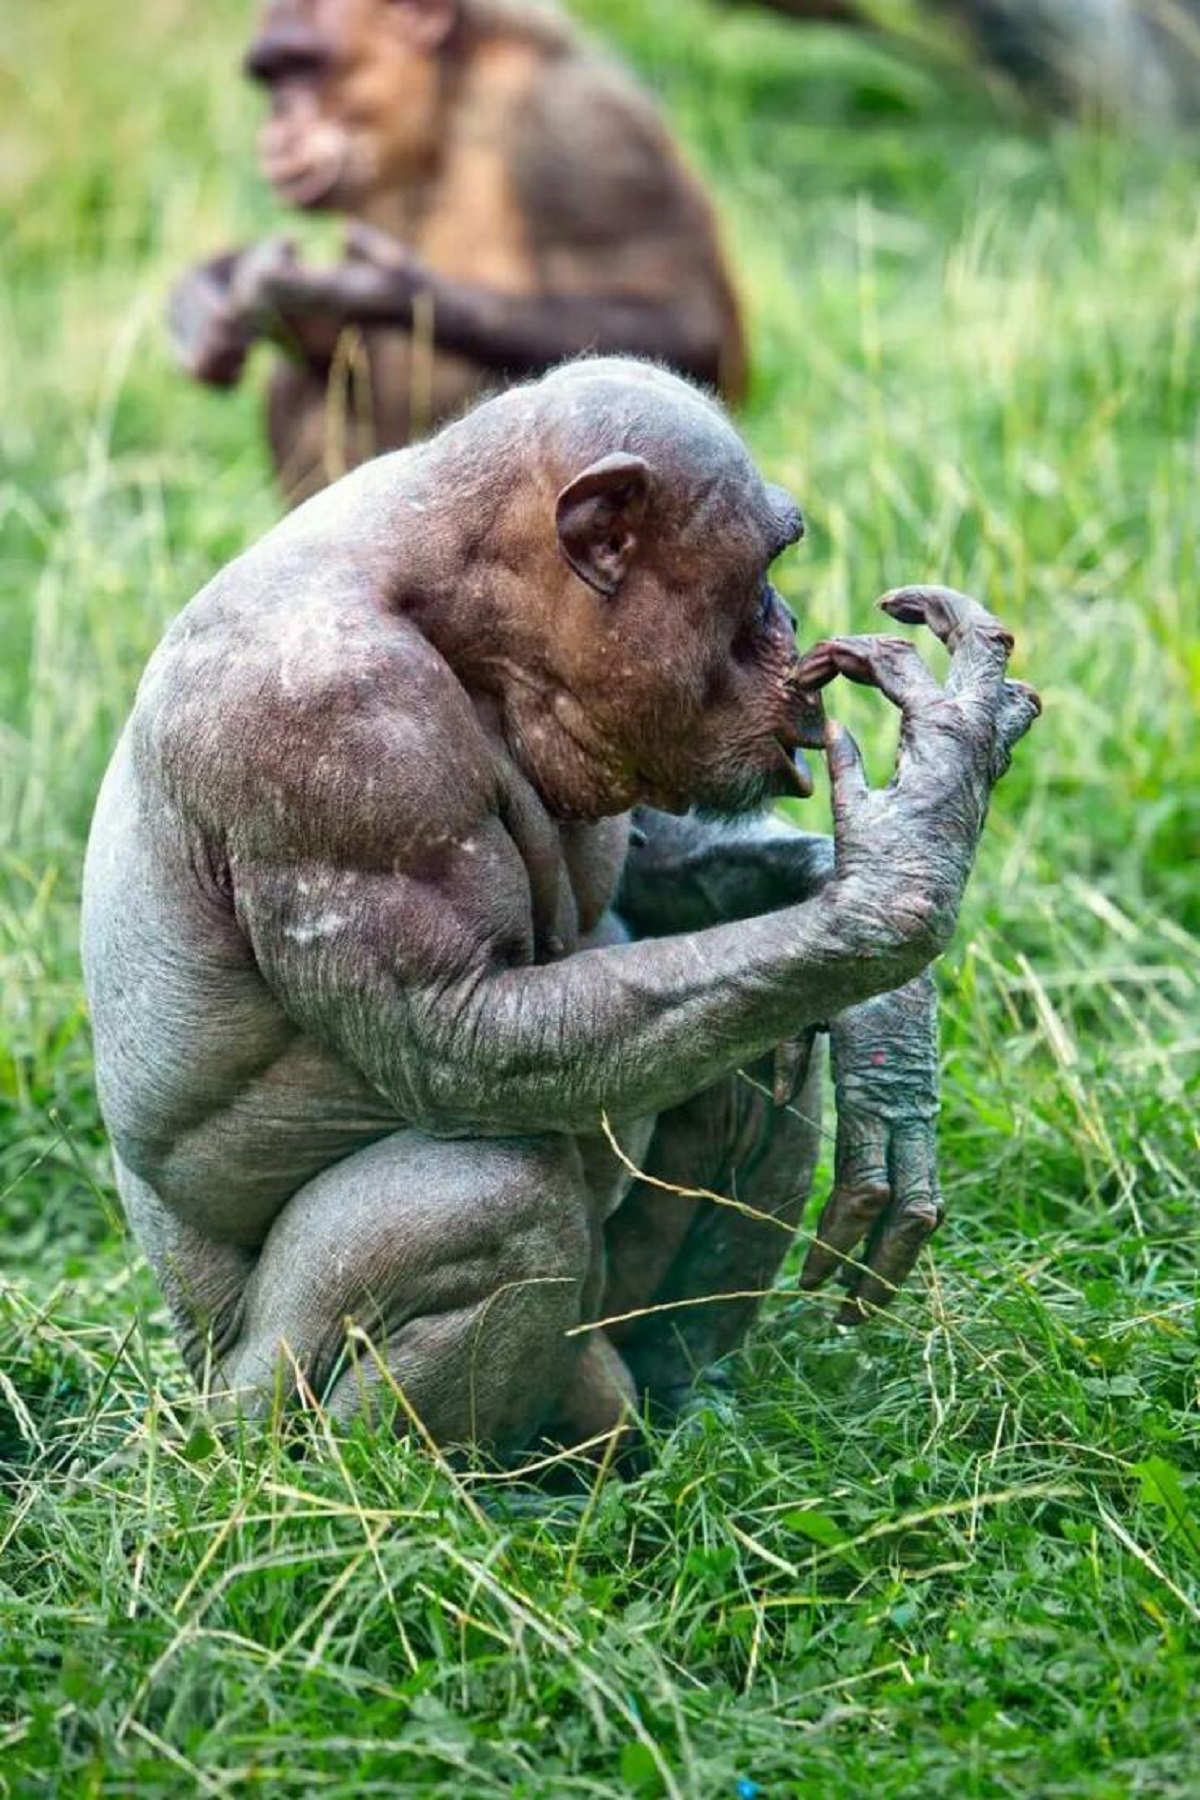 This picture of a hairless chimpanzee really demonstrates just how absolutely yoked chimps are: